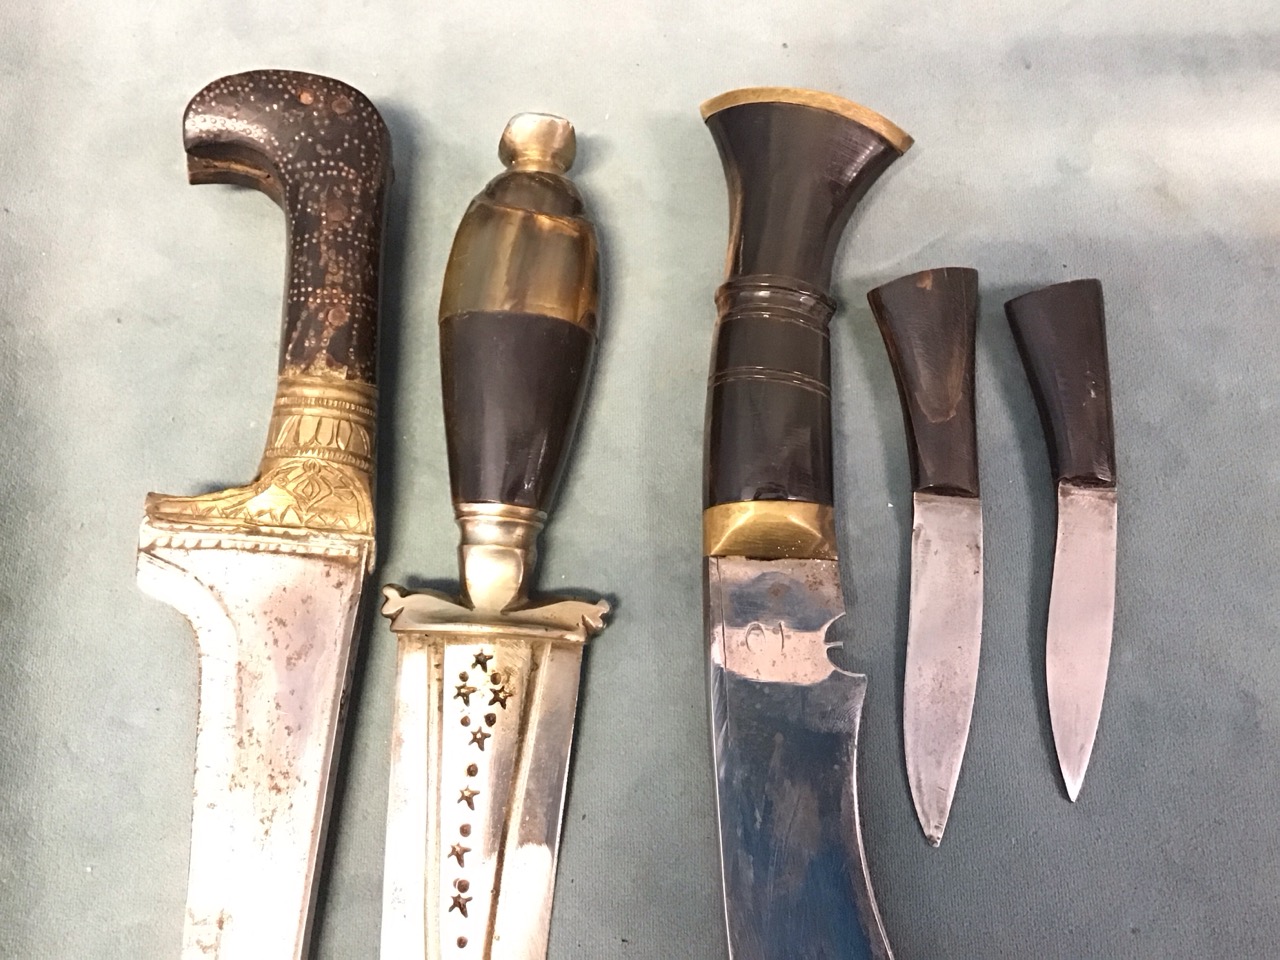 A Ghurka kukri, chakmak & karda knives with horn handles, brass fittings & leather faras sheath; - Image 3 of 3